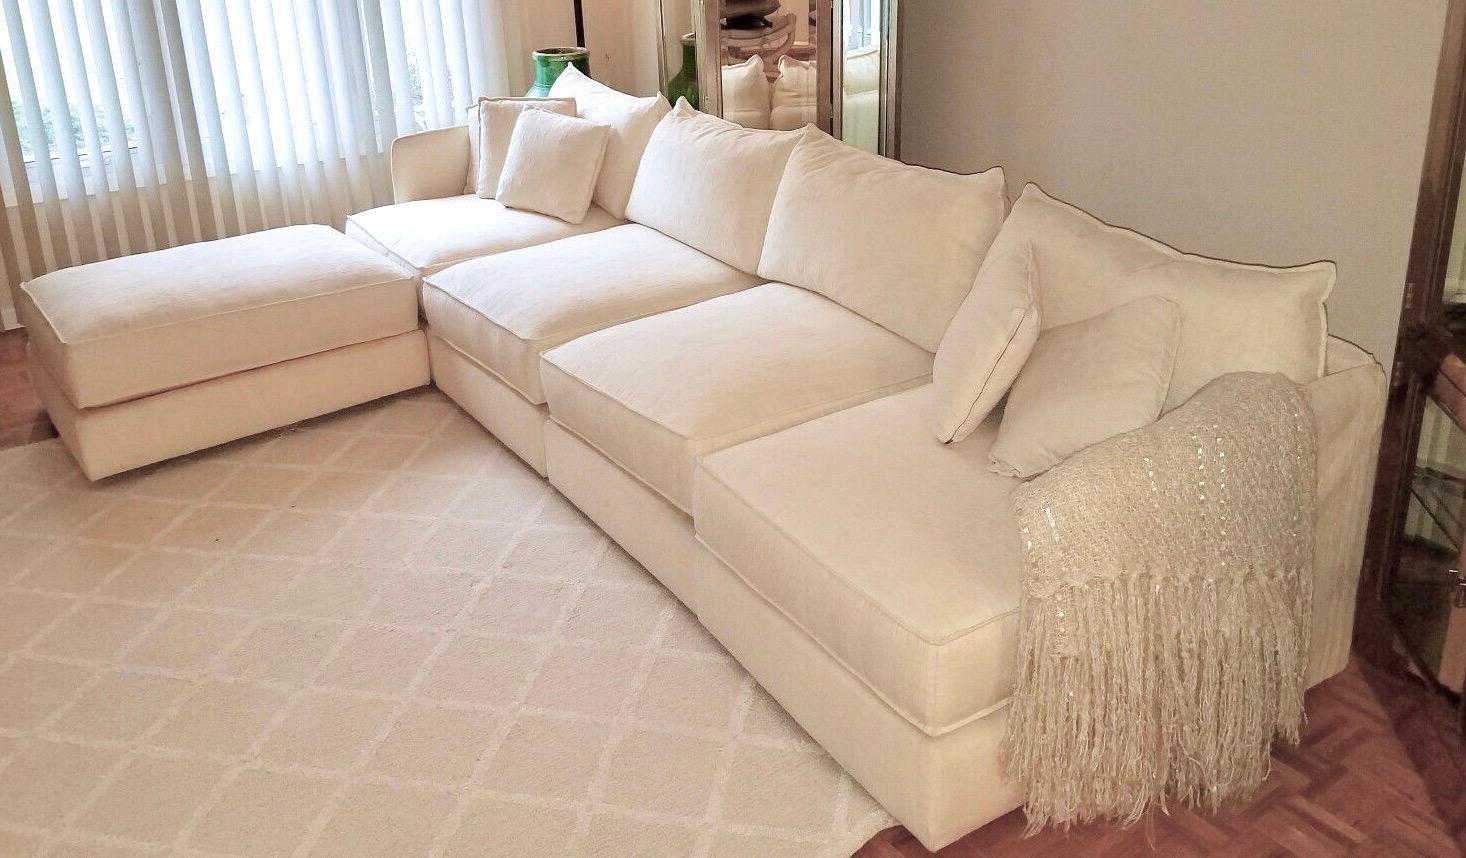 Vintage baker furniture sectional sofa with ottoman, four-seat, linen cream Bouclé-like original textile. Gorgeous lines and exceedingly comfortable. Down cushions. Four seats can come together to form long sofa or set up in a variety of